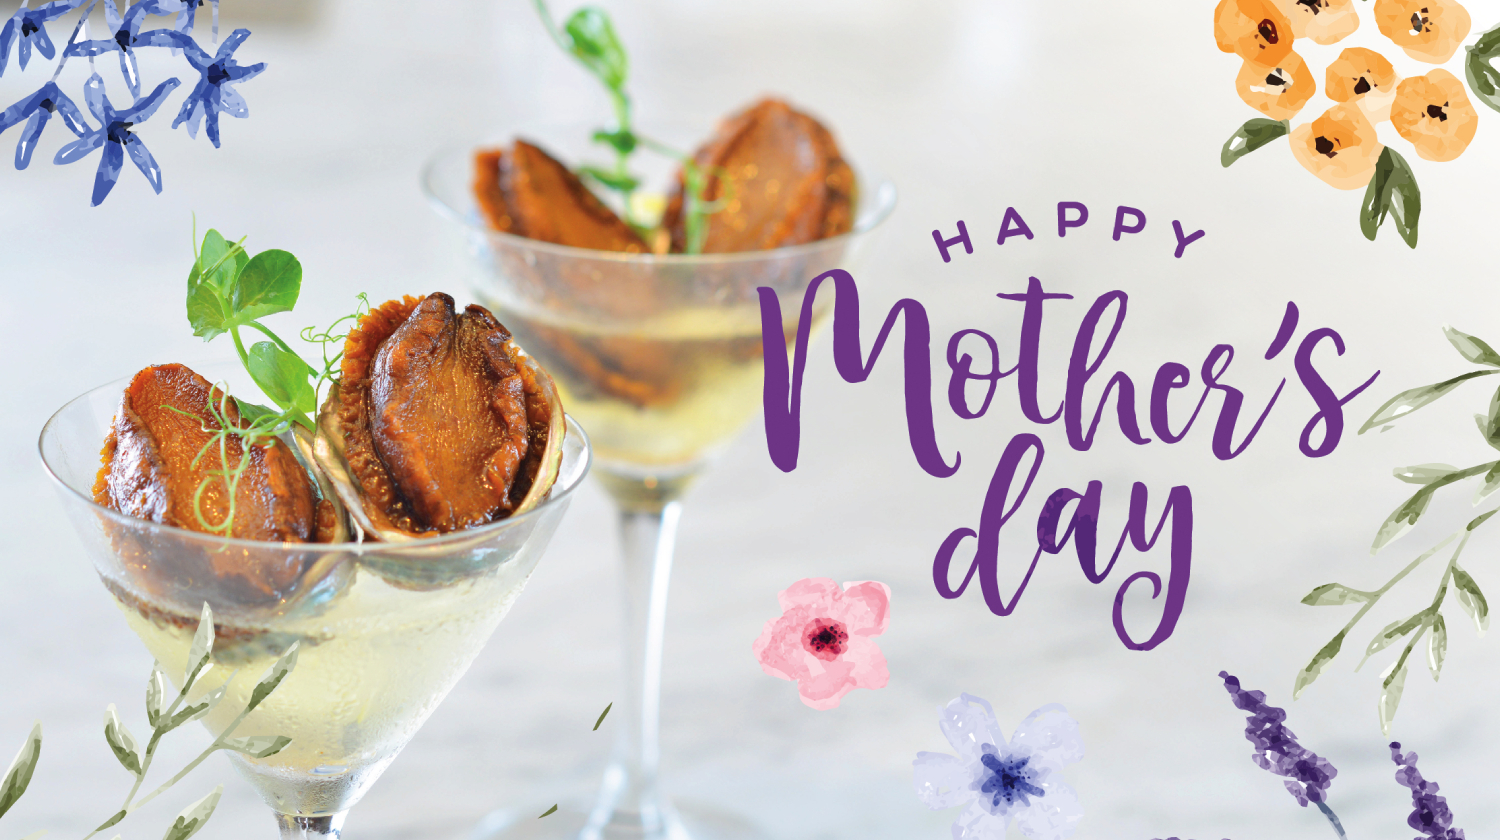 Happy Mother’s Month!